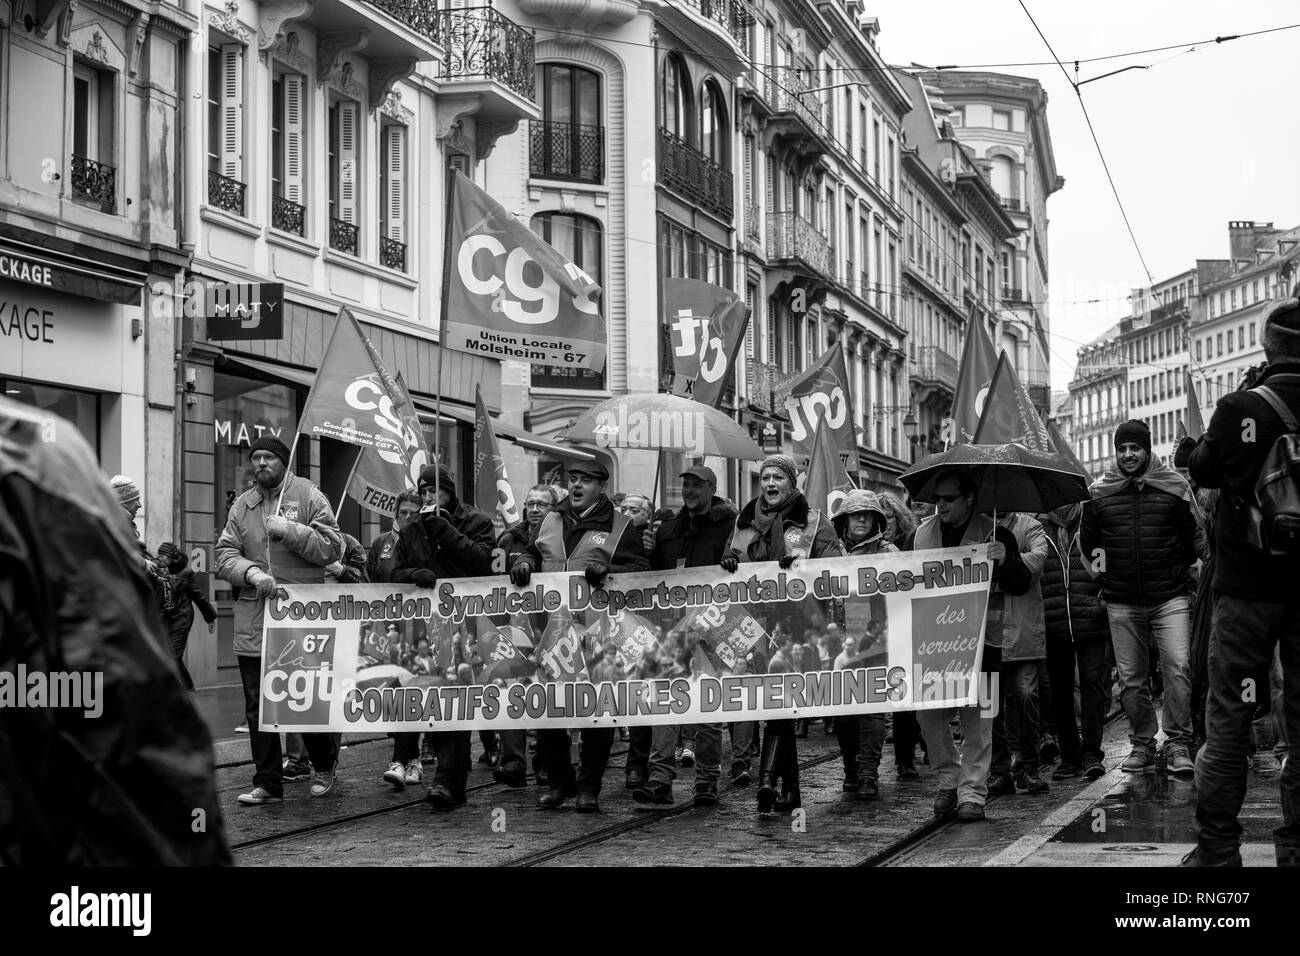 STRASBOURG, FRANCE - MAR 22, 2018: CGT General Confederation of Labour workers with placard at demonstration protest against Macron French government string of reforms - people with large banner combatif solidaires determines Stock Photo